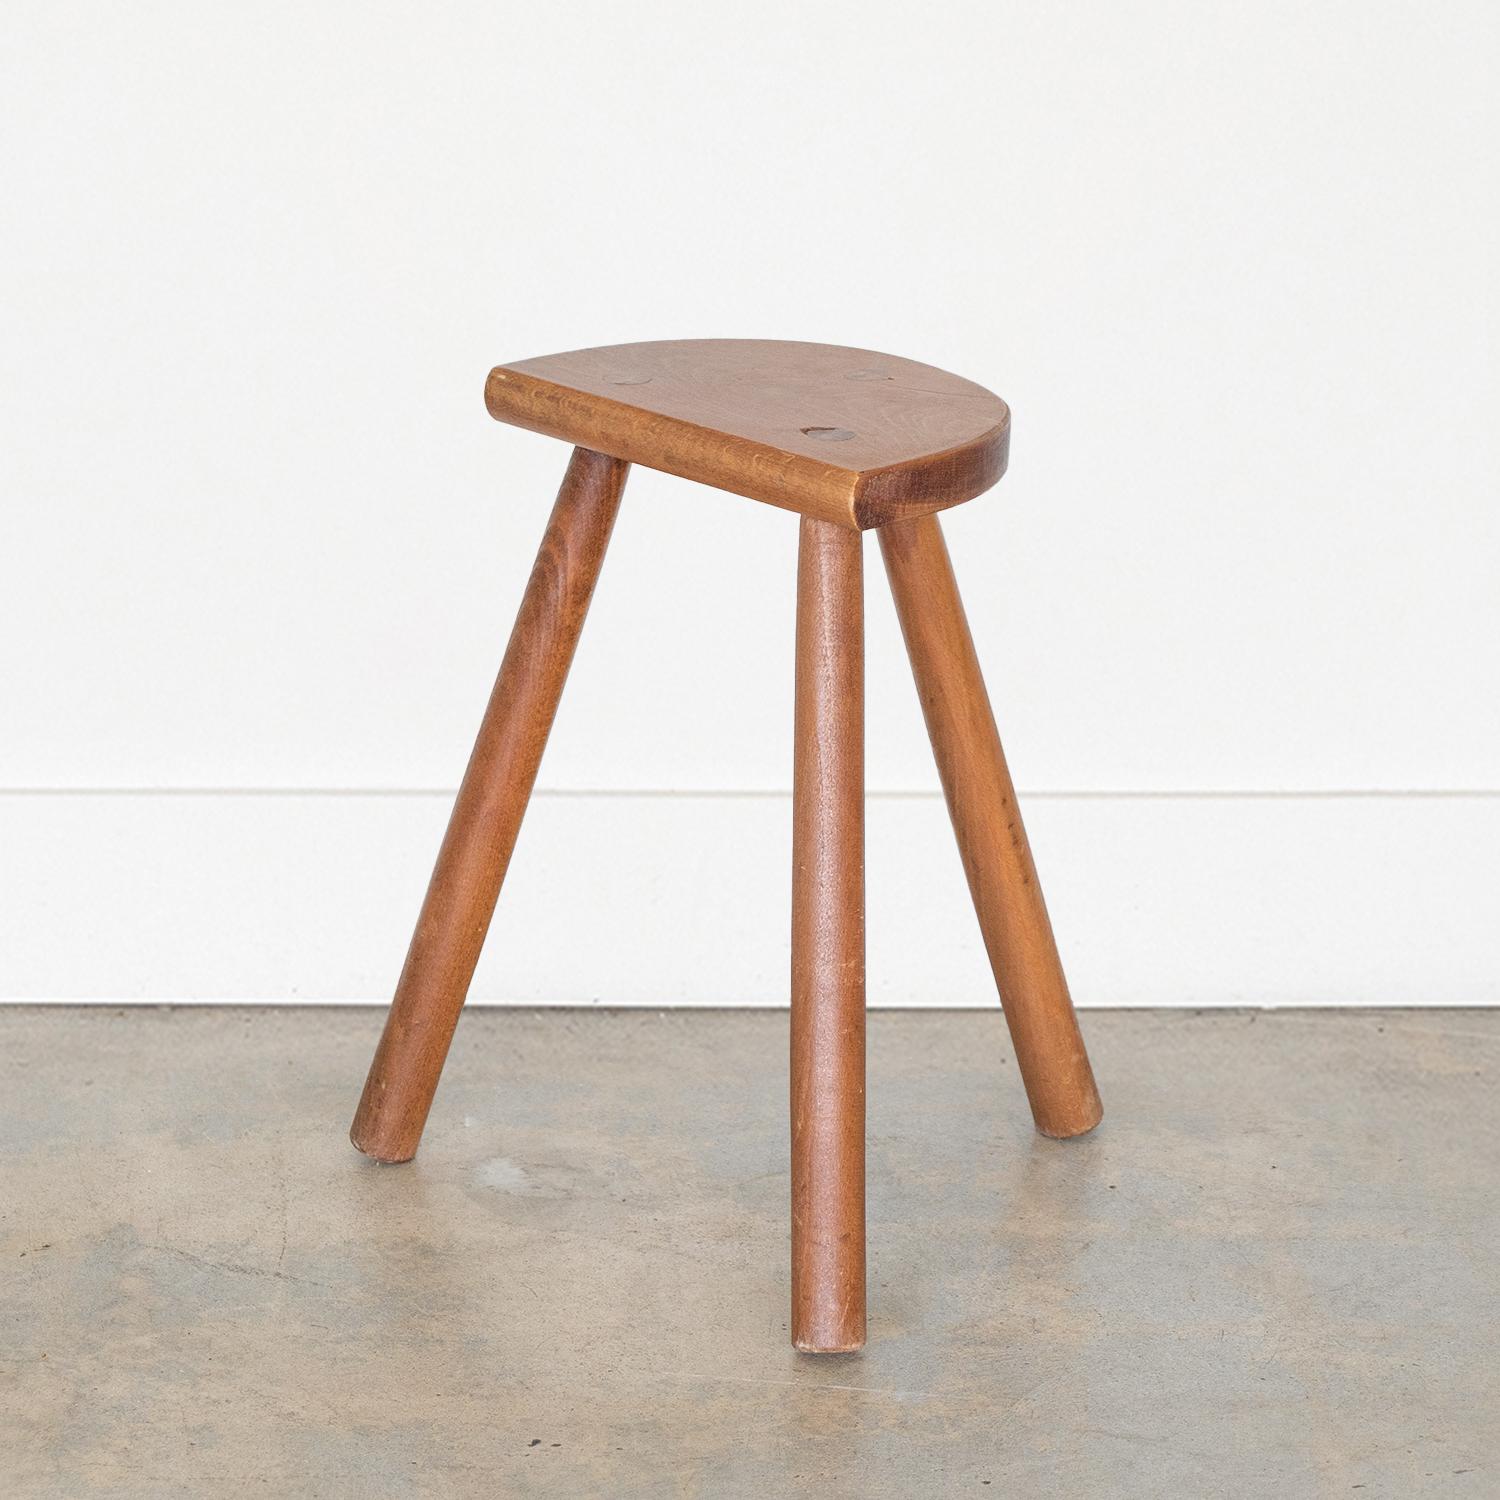 Vintage tall stool with semi-circle seat and tripod legs from France. Original finish with great age markings and patina. Can be used as a stool or as side table next to chairs.

